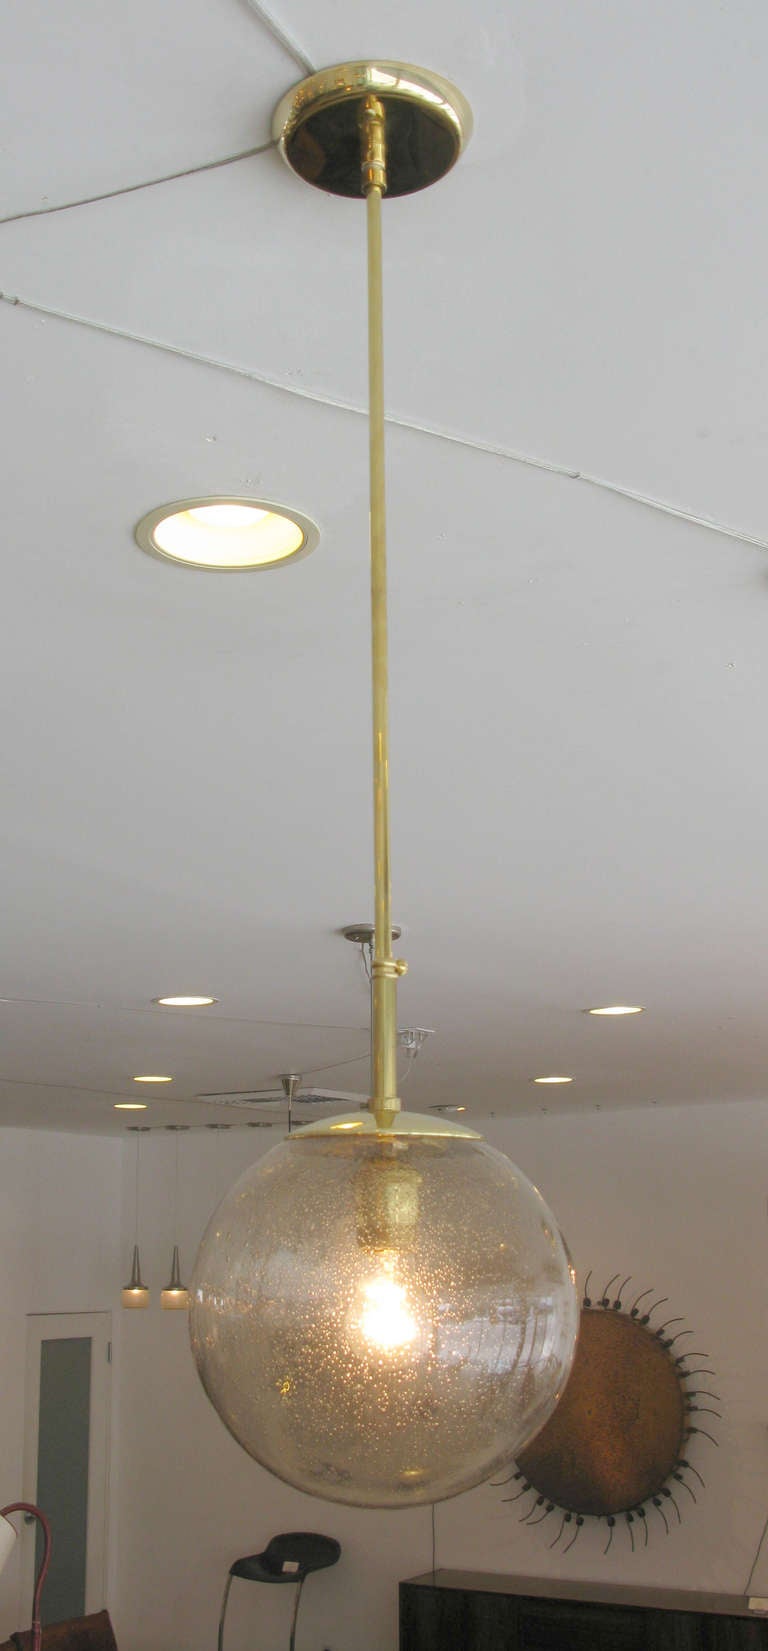 Glass ceiling pendant by Doria of Germany. Bronze hued bubbled glass with polished brass hardware.